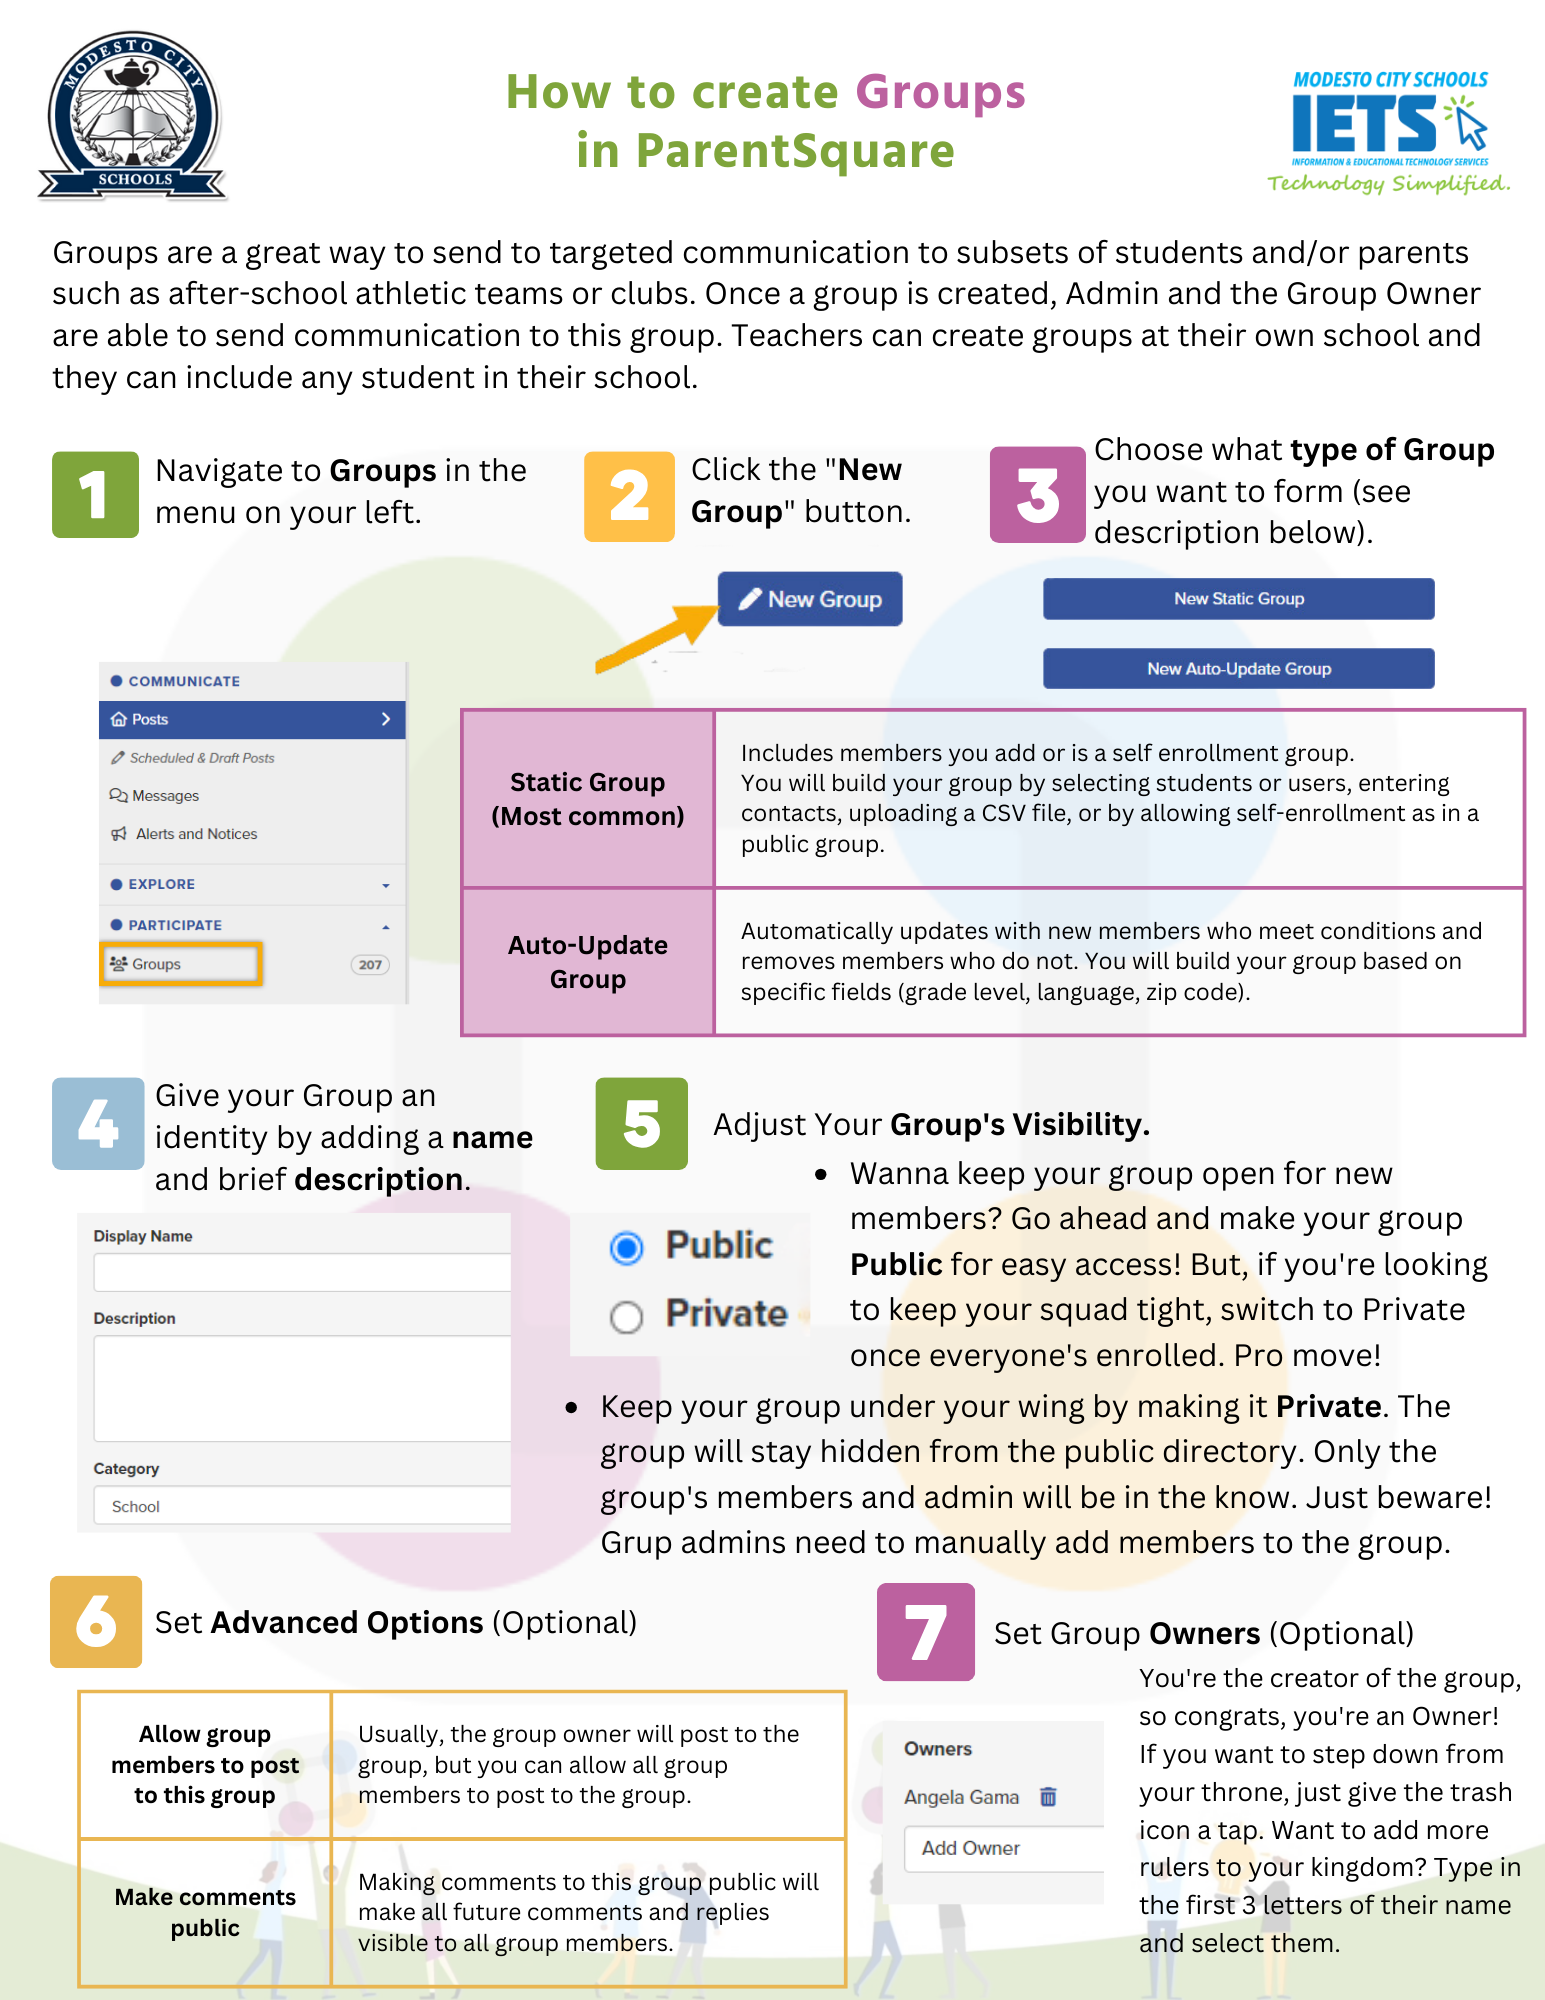 Handout on how to create groups